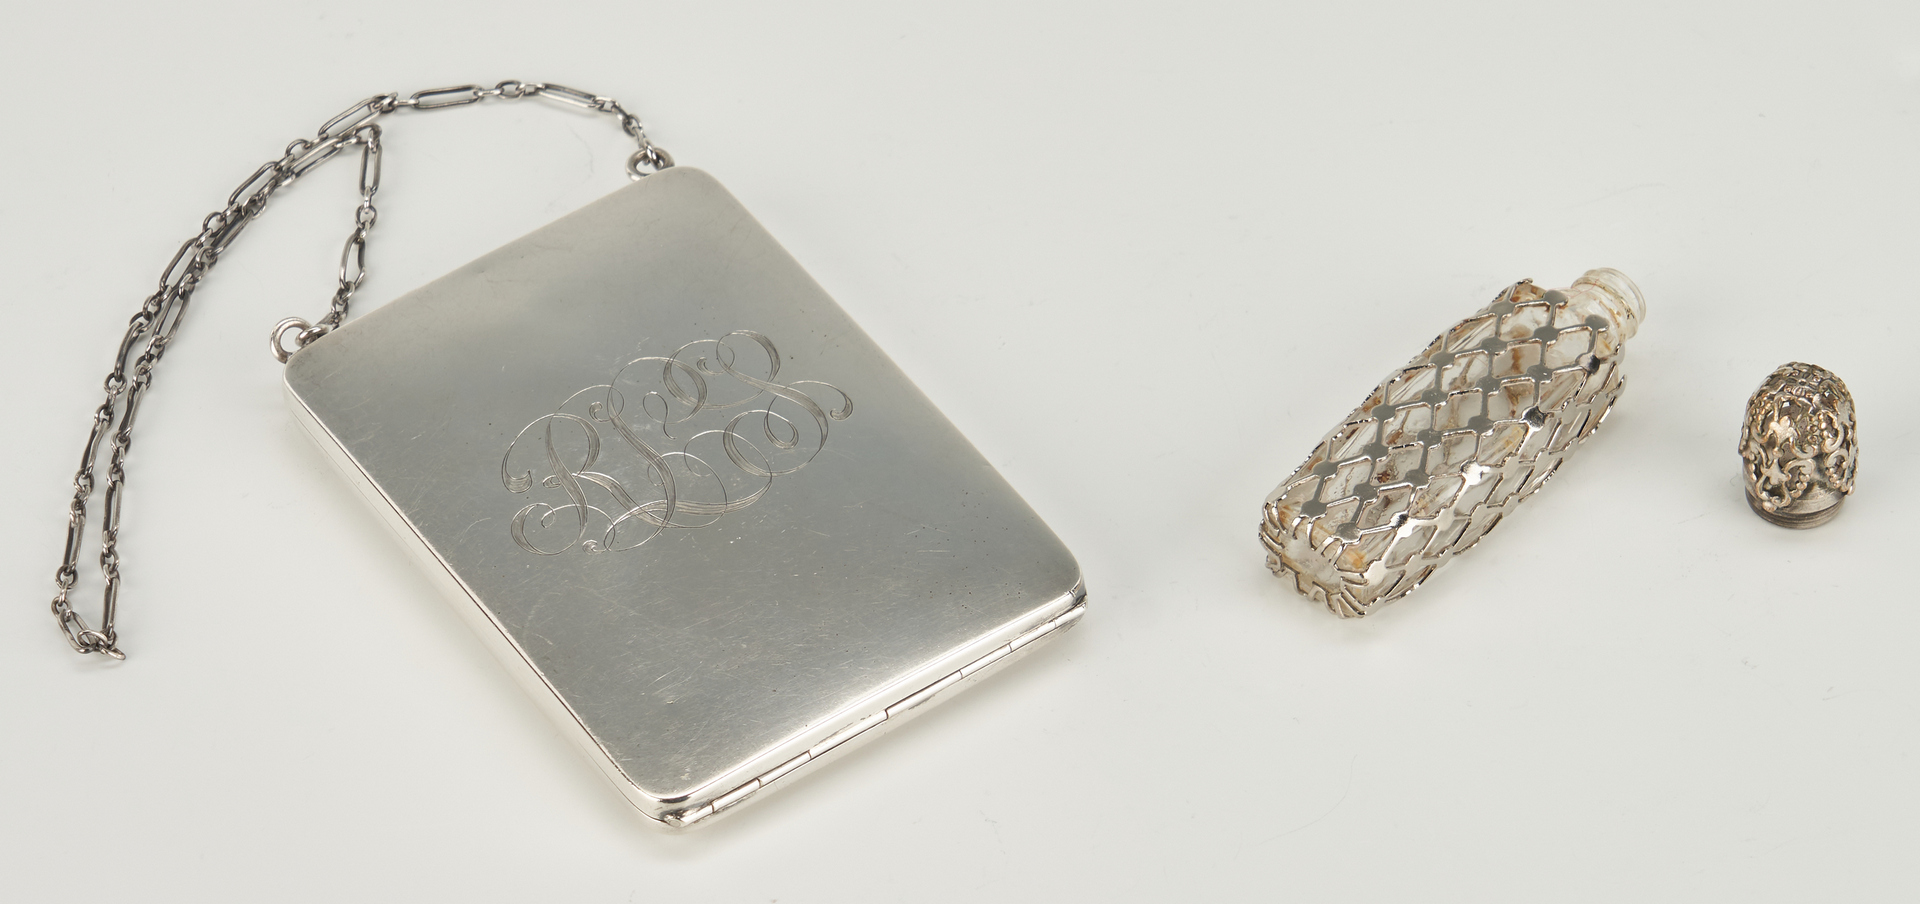 Lot 482: 7 Silver and Glass Vanity Items, incl. Mary Gregory Pill Box